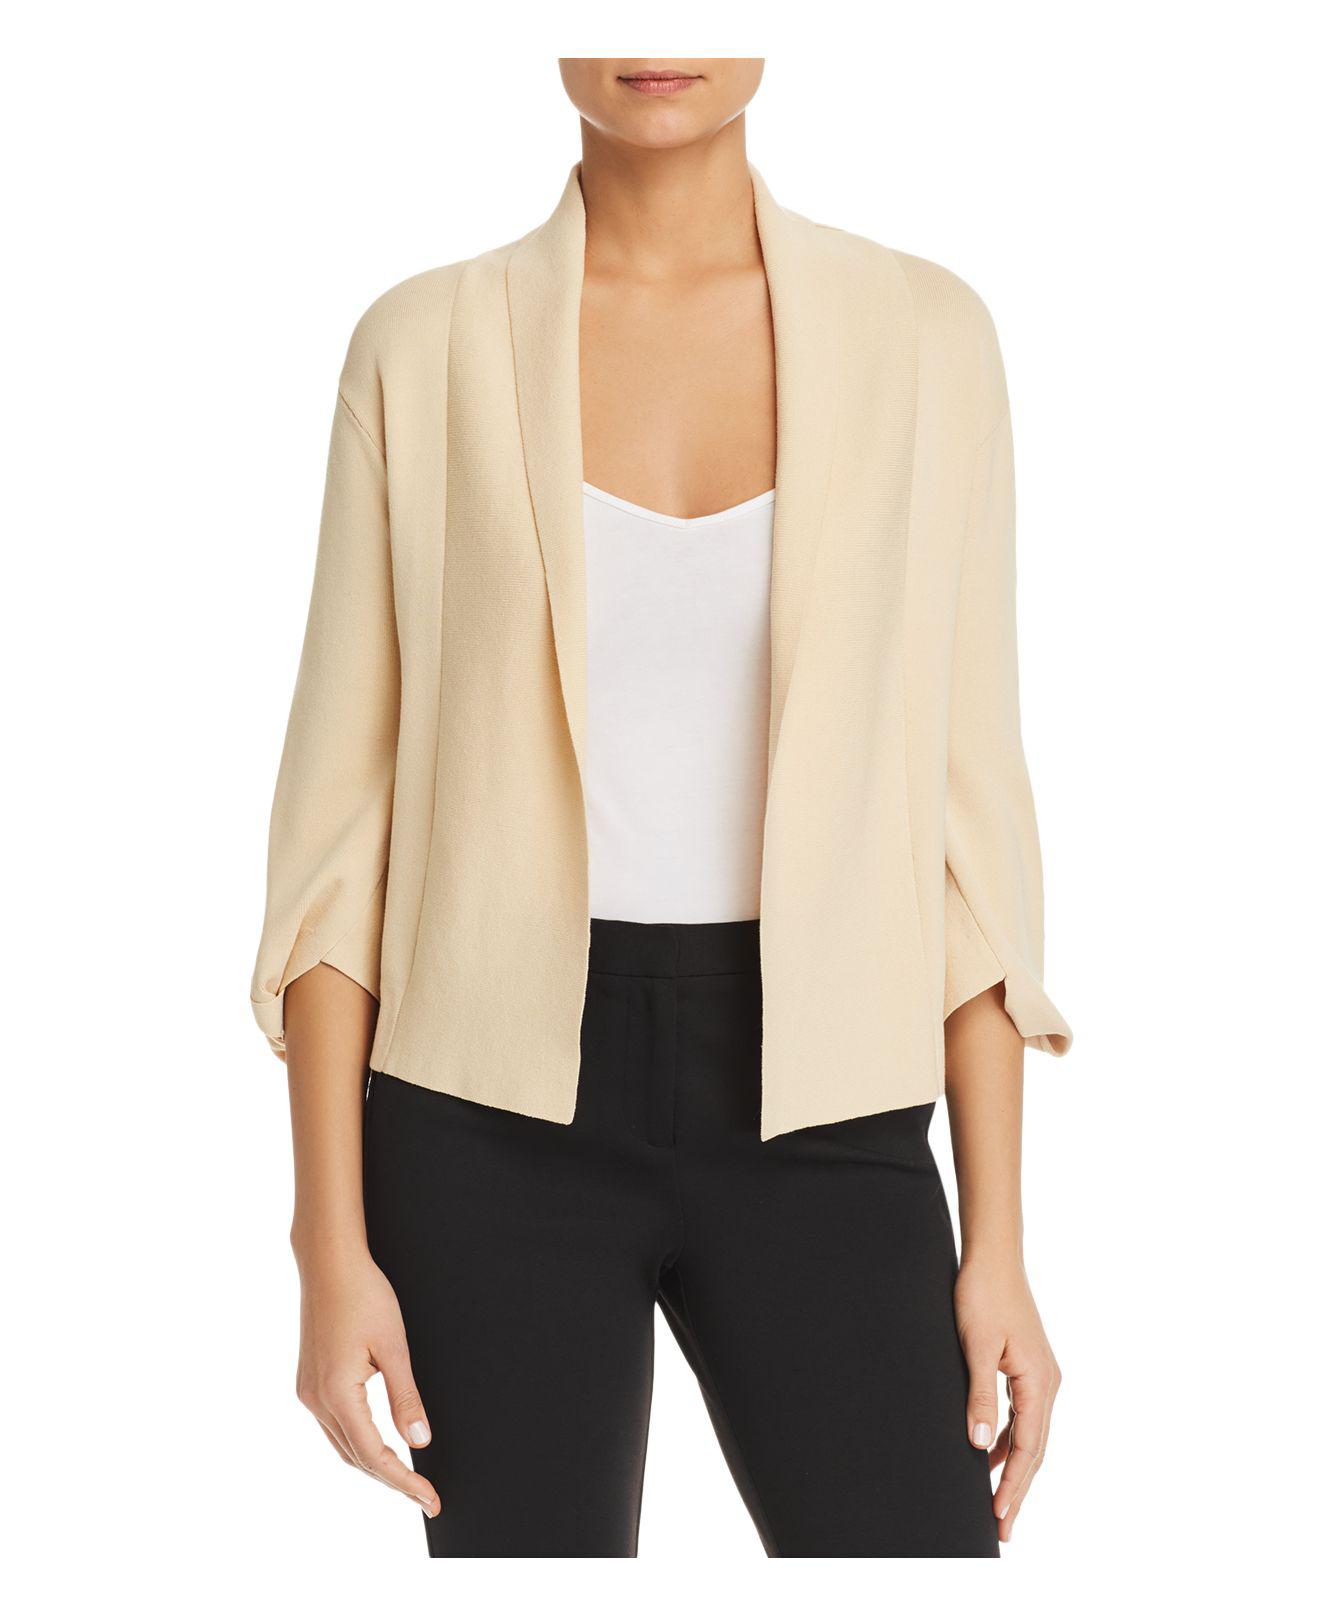 Lyst - Donna Karan Open-front Cardigan in Natural